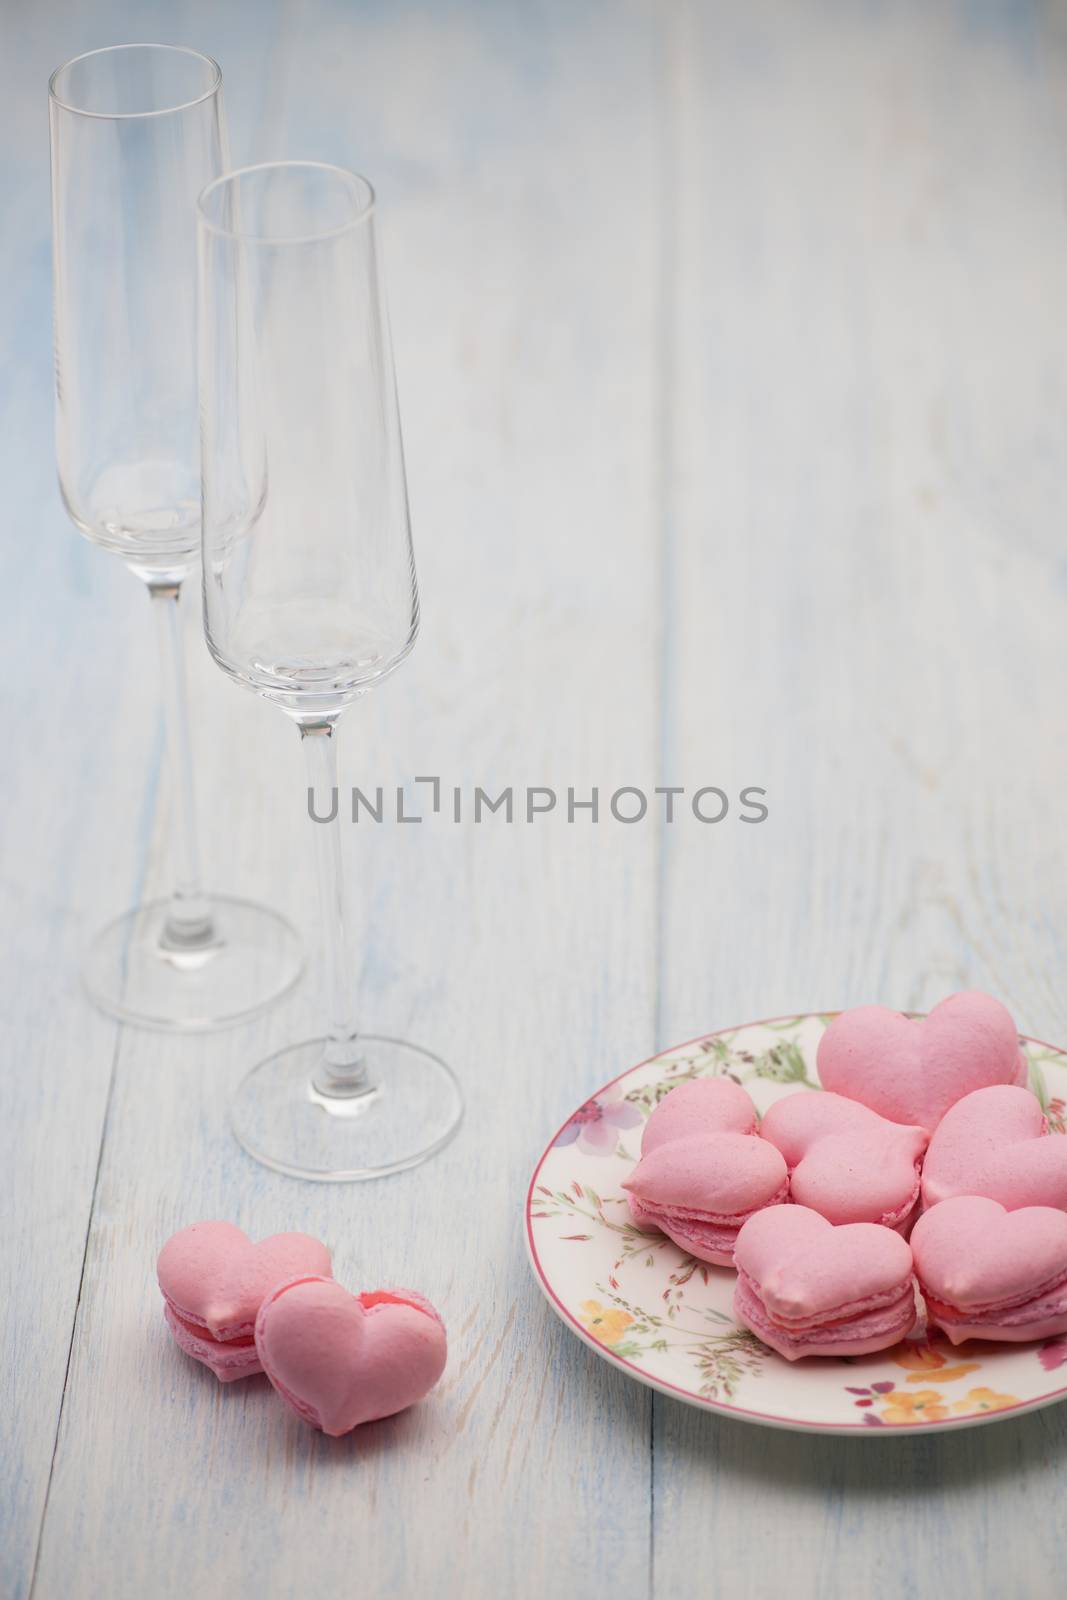 pink cookies in the shape of hearts on a plate and champagne glasses on wooden boards on Valentine's Day